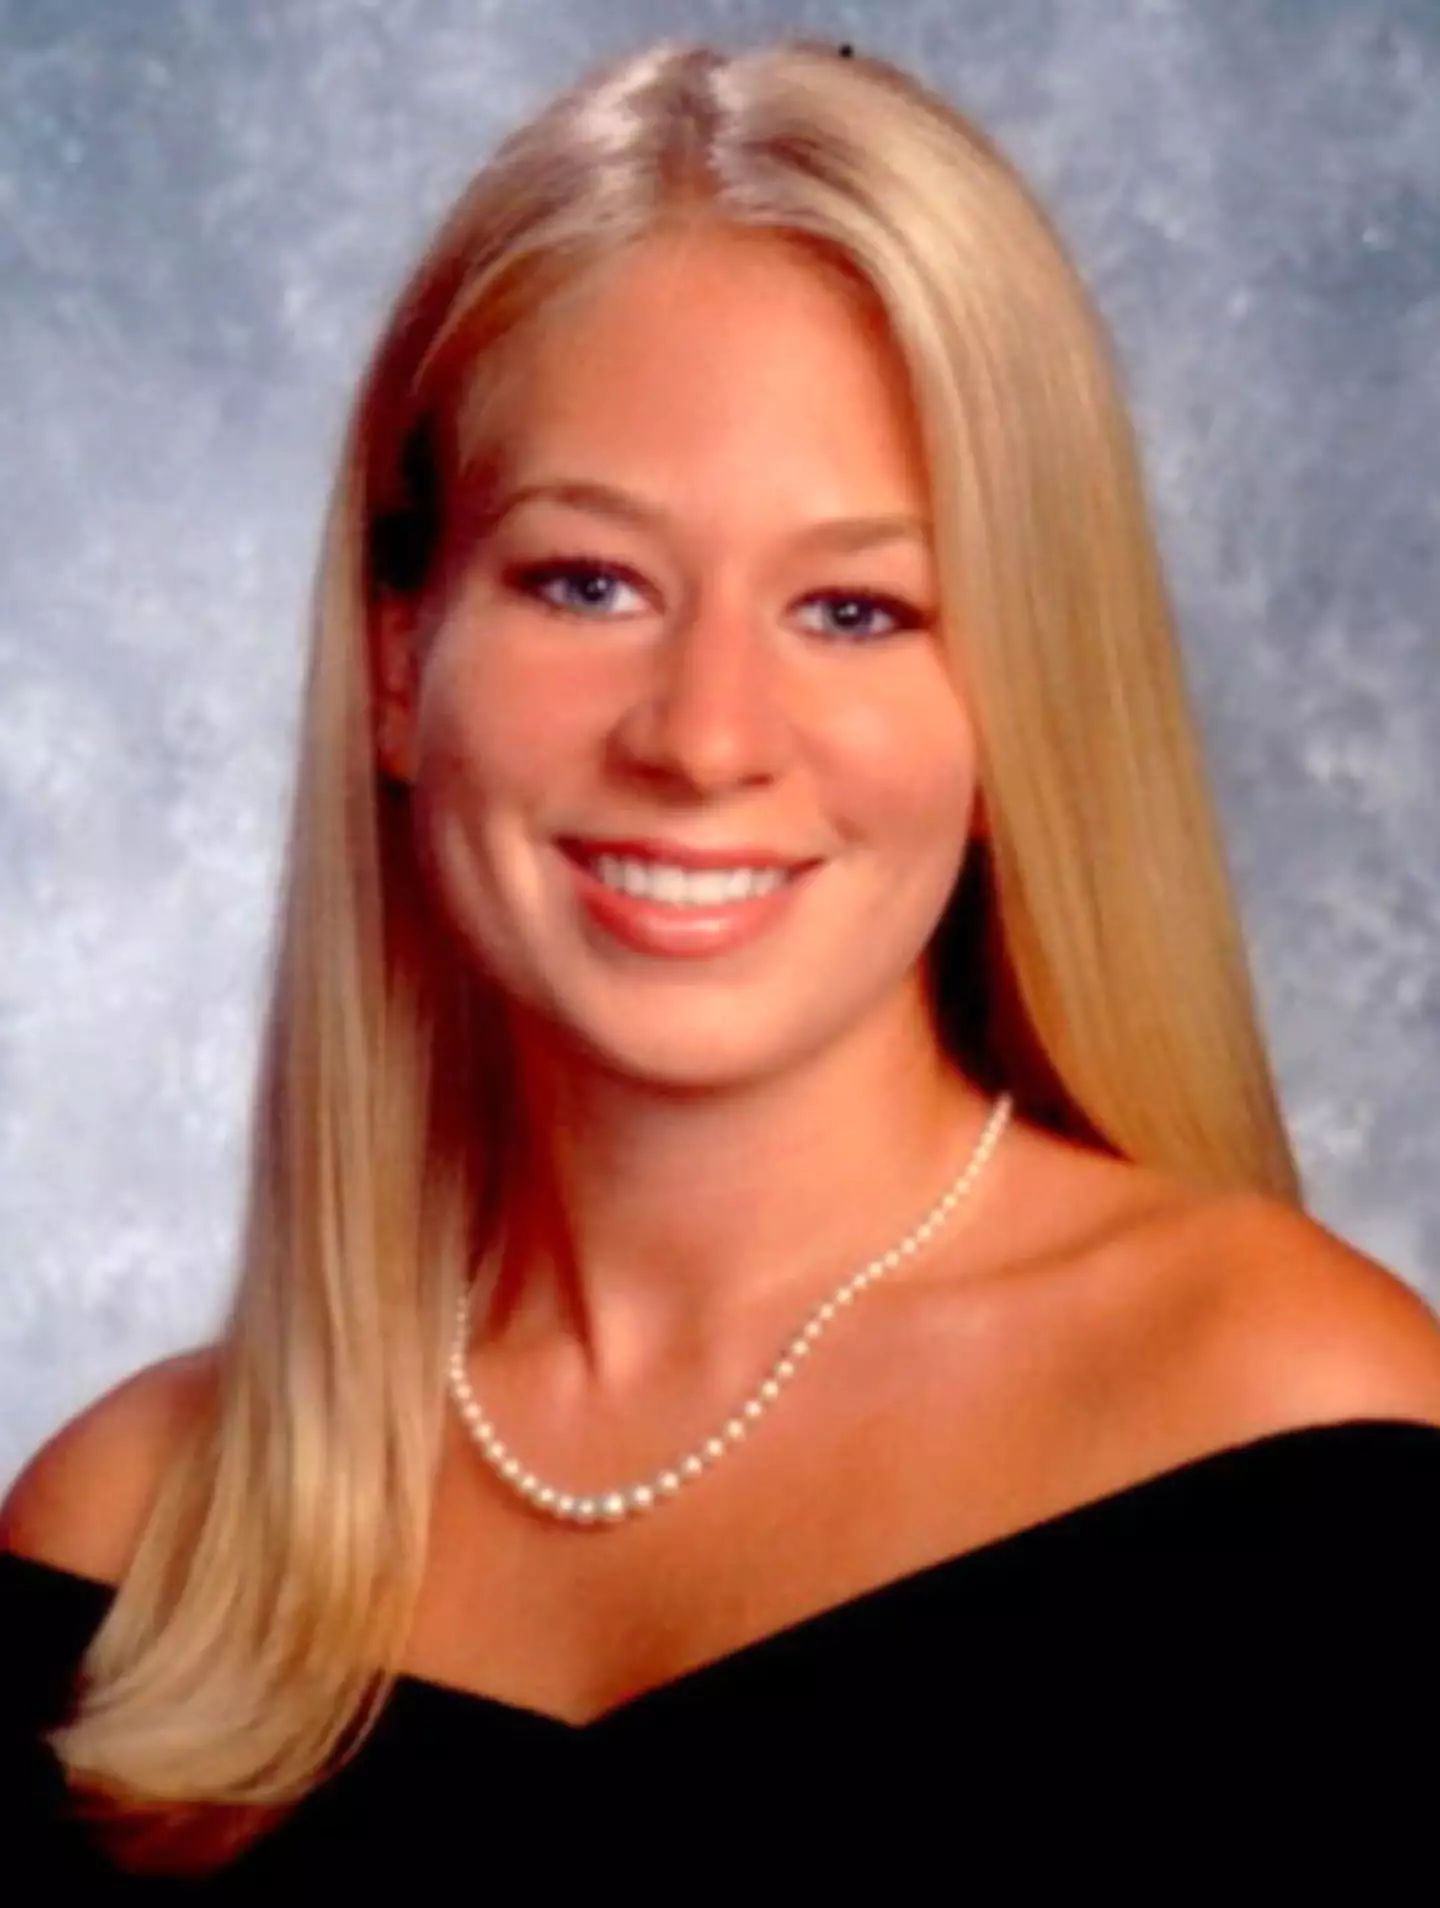 Natalee Holloway was killed in 2005.